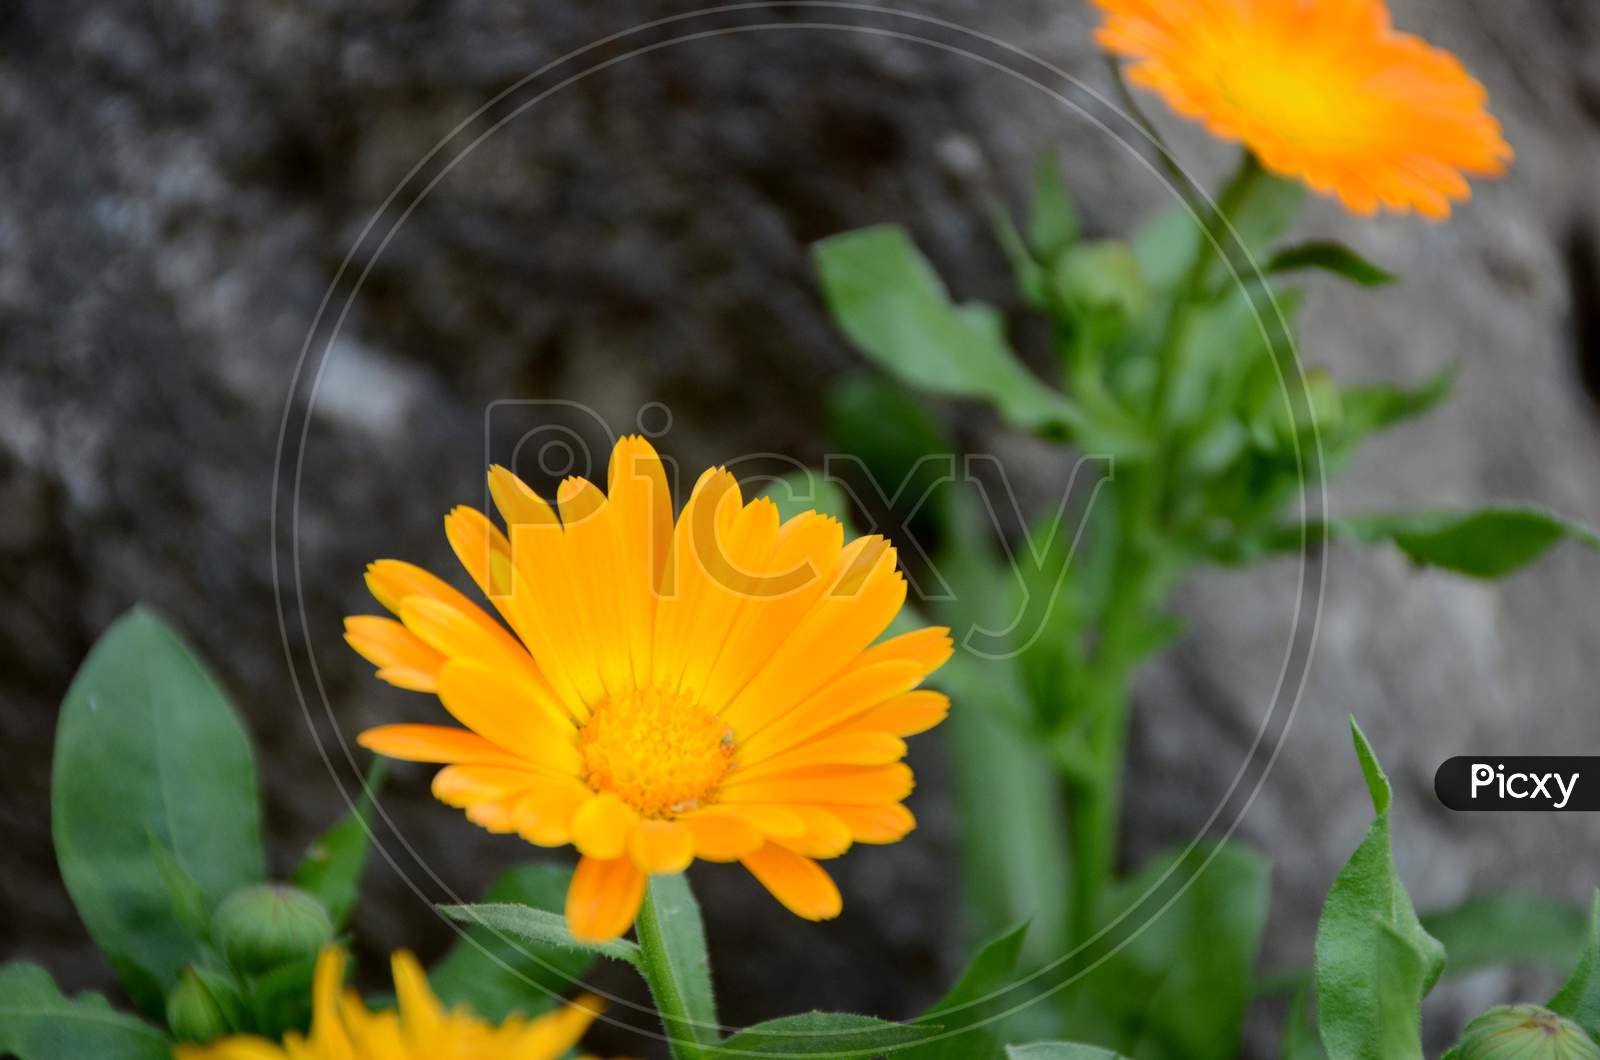 The Beautiful Calendula Orange Flower With Leaves And Plant In The Garden.